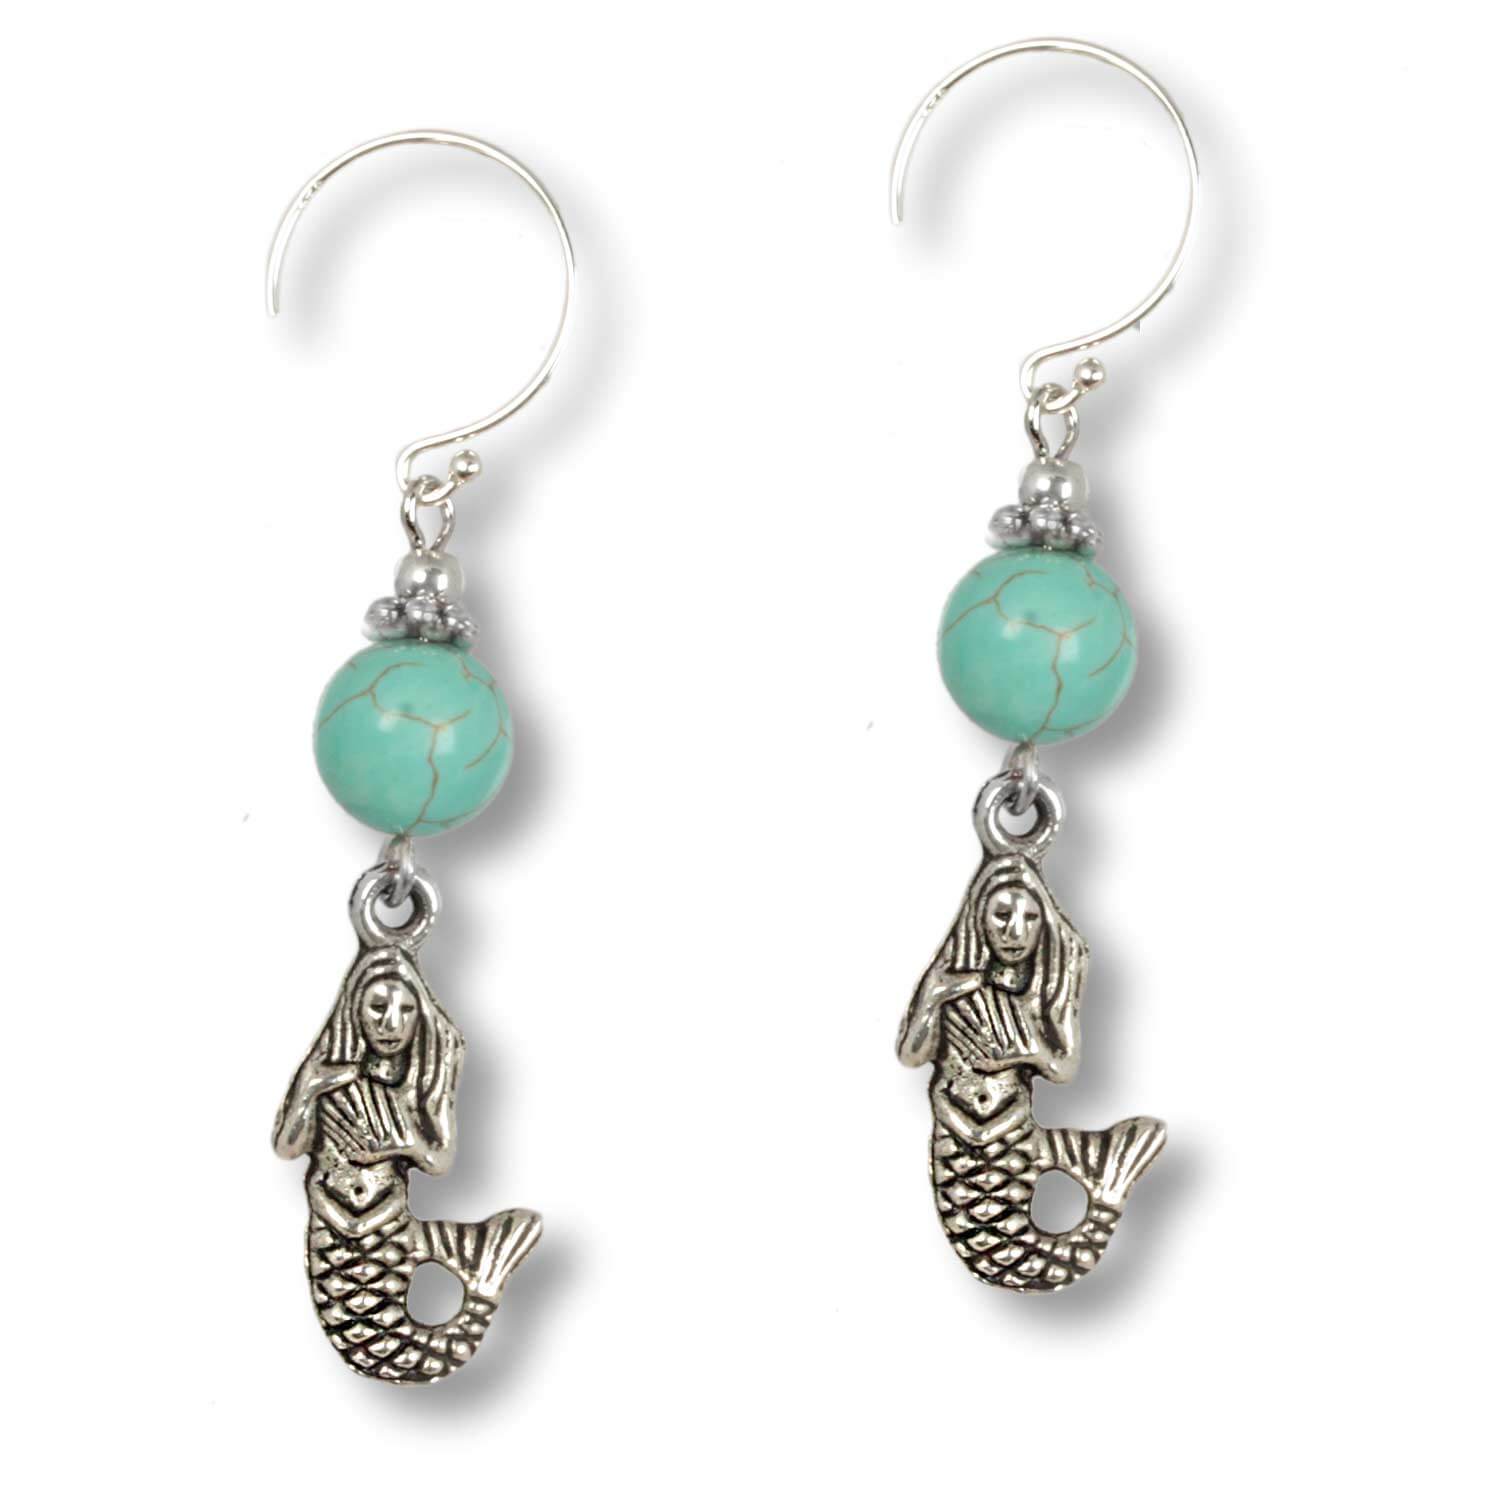 Seagrass - Ocean Daughters earring with turquoise